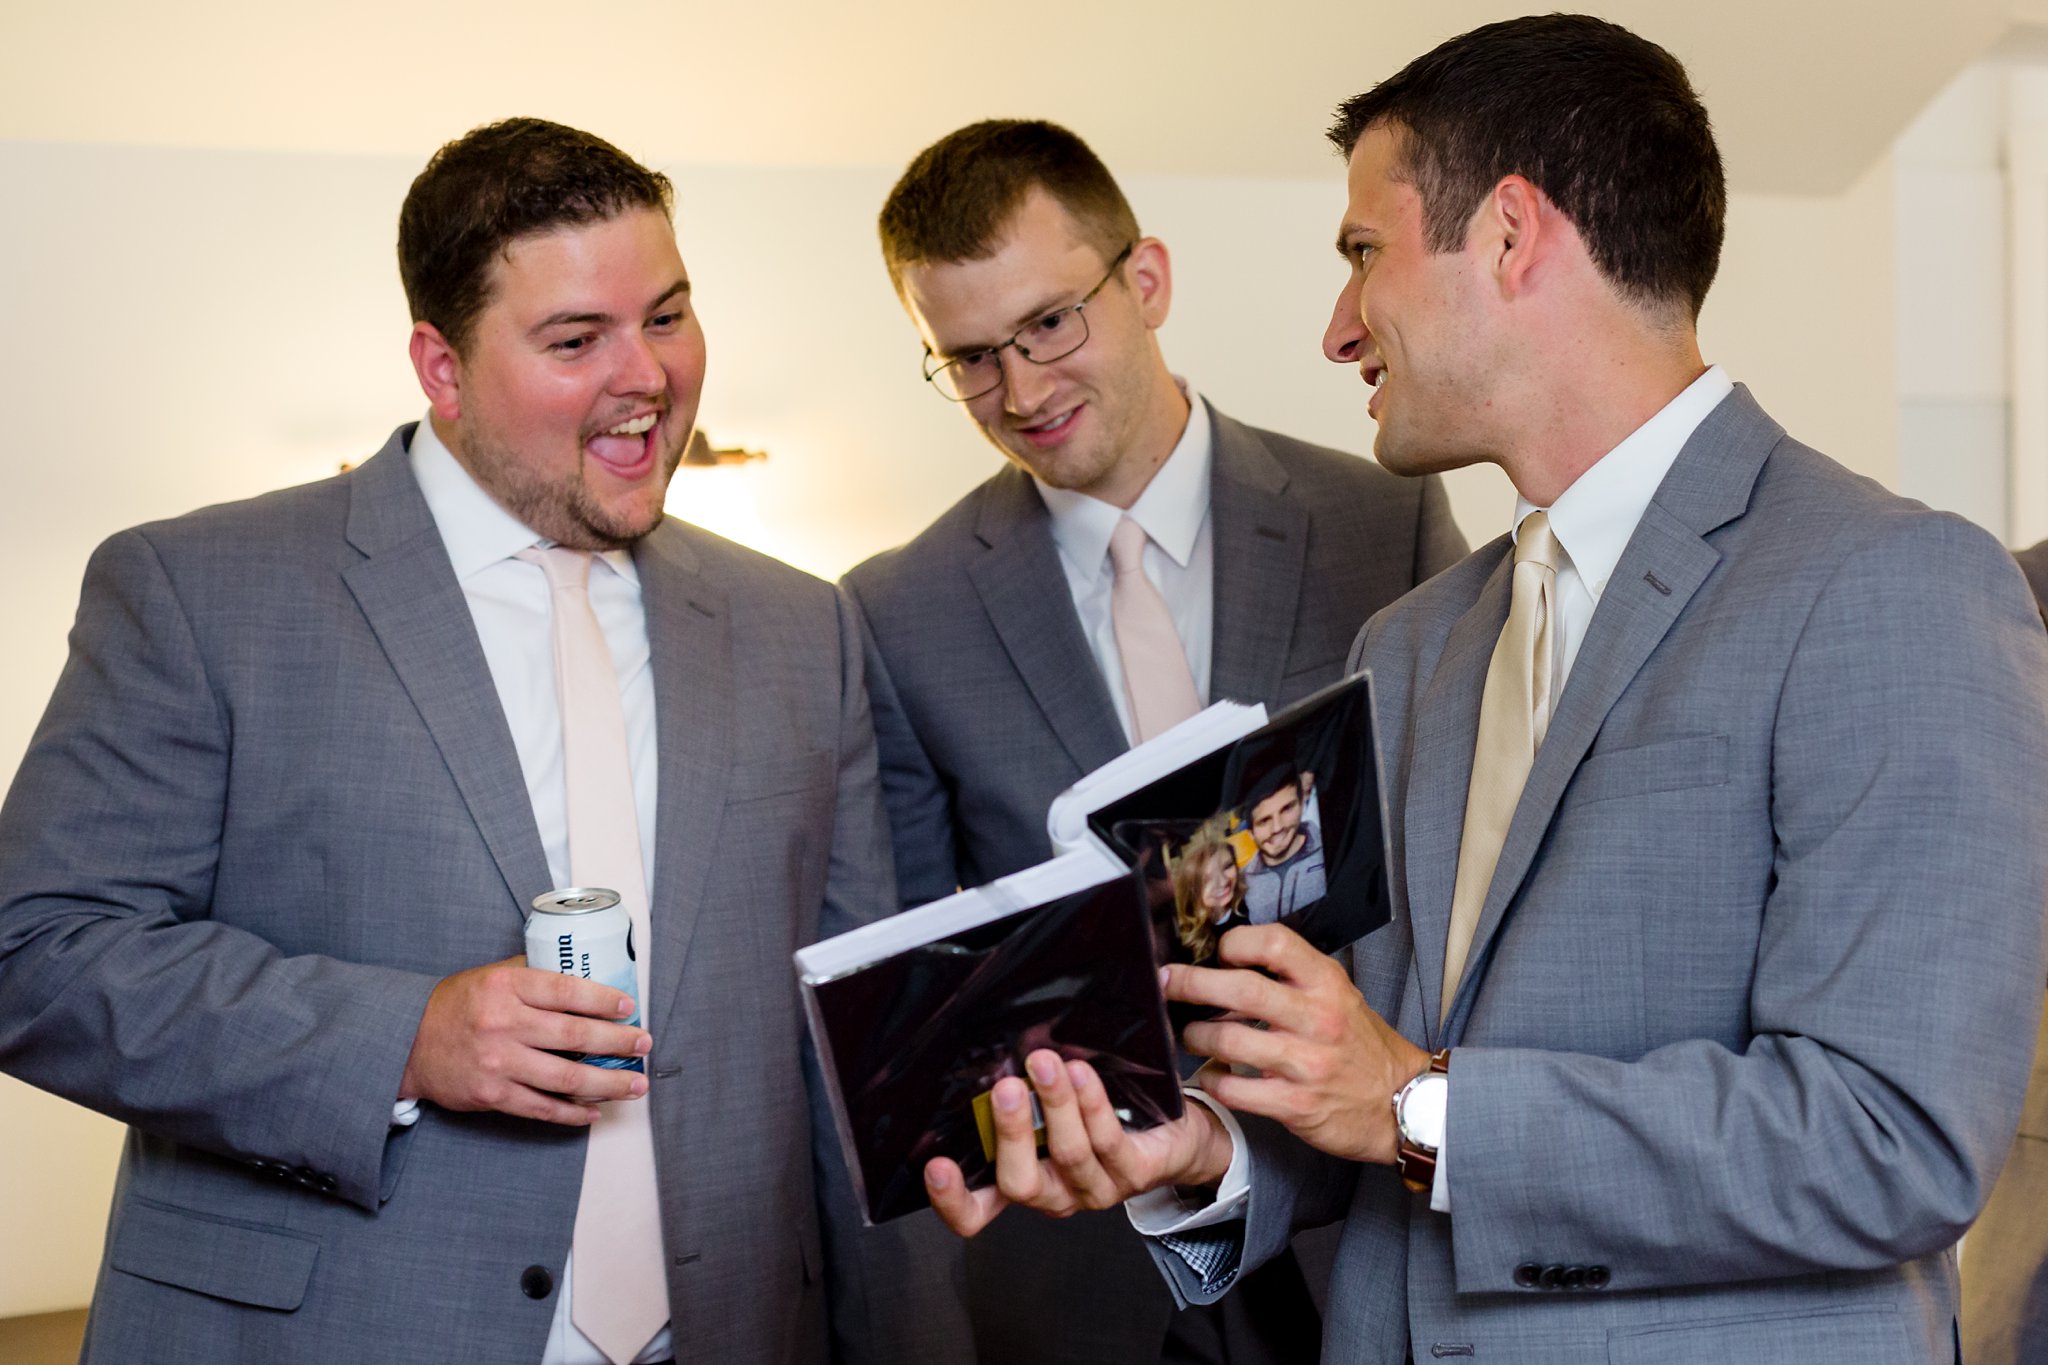 The groom and the groomsmen look at a photo book the bride created for her groom on their wedding day